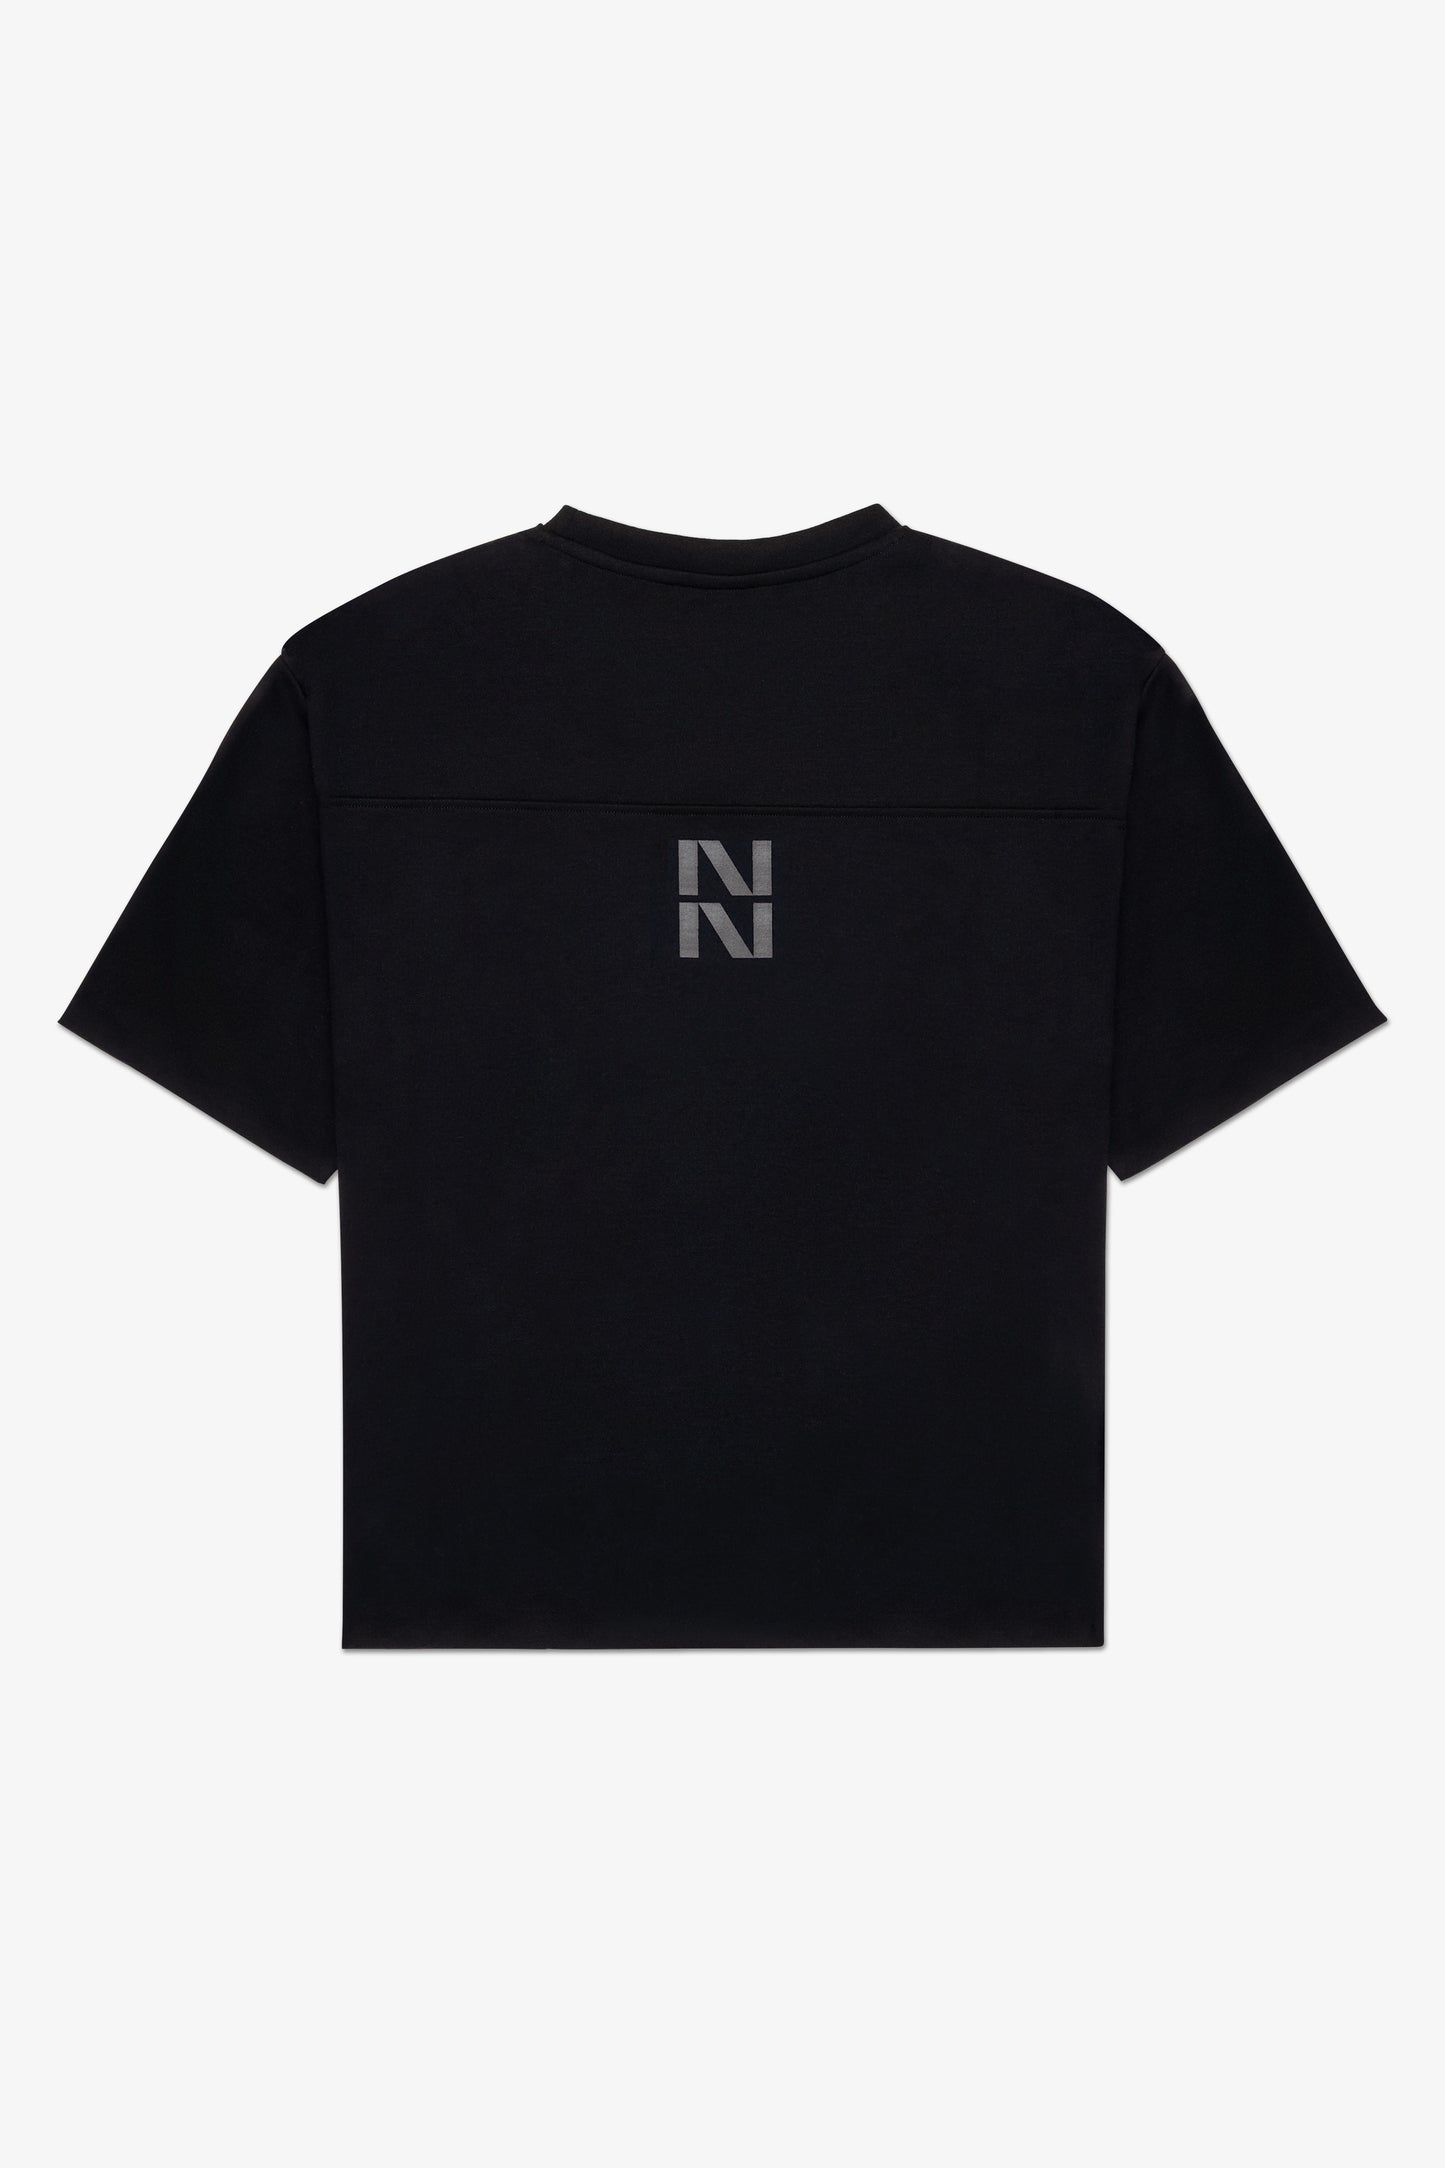 Back of black boxy t-shirt with NN logo on the center